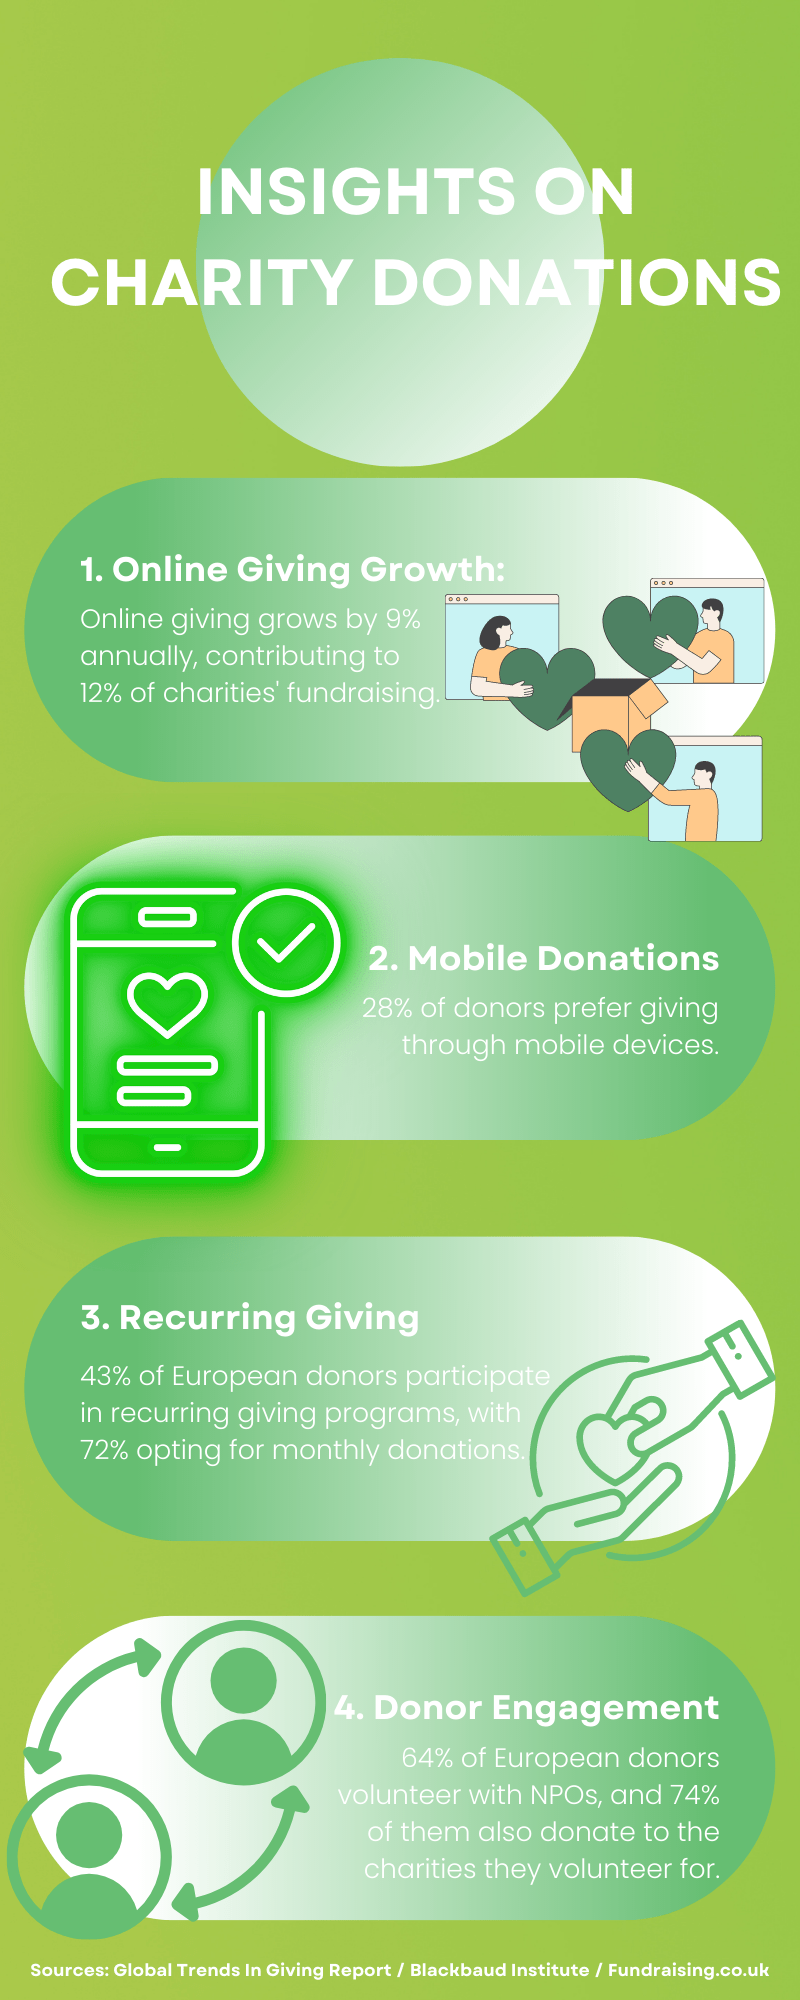 Insights On Charity Donations